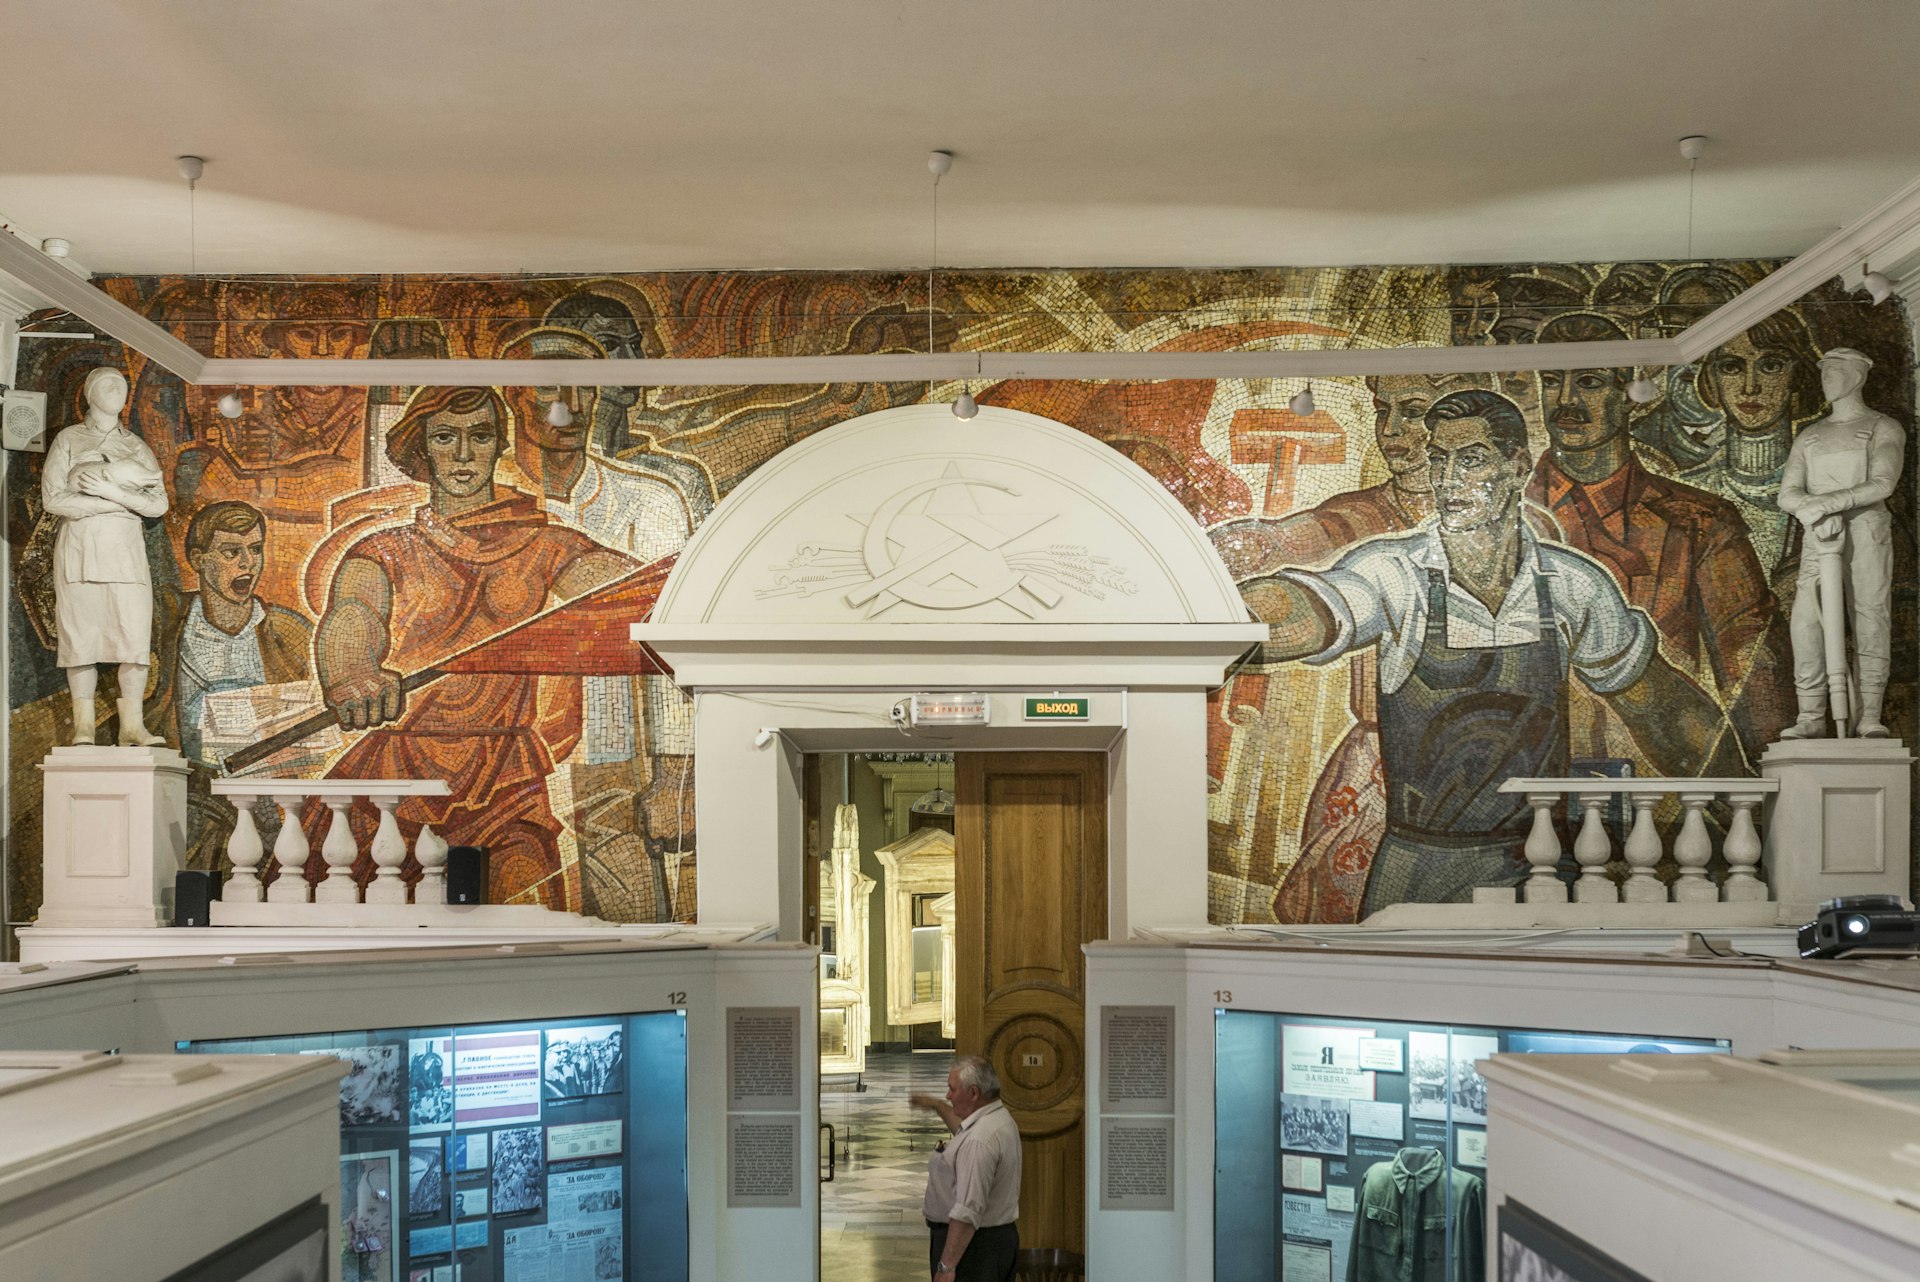 A large mosaic of reds and browns depicting many different people covers a wall. The doorway in the middle of the mosaic has a hammer and sickle emblem above it. Museum displays can be seen below.